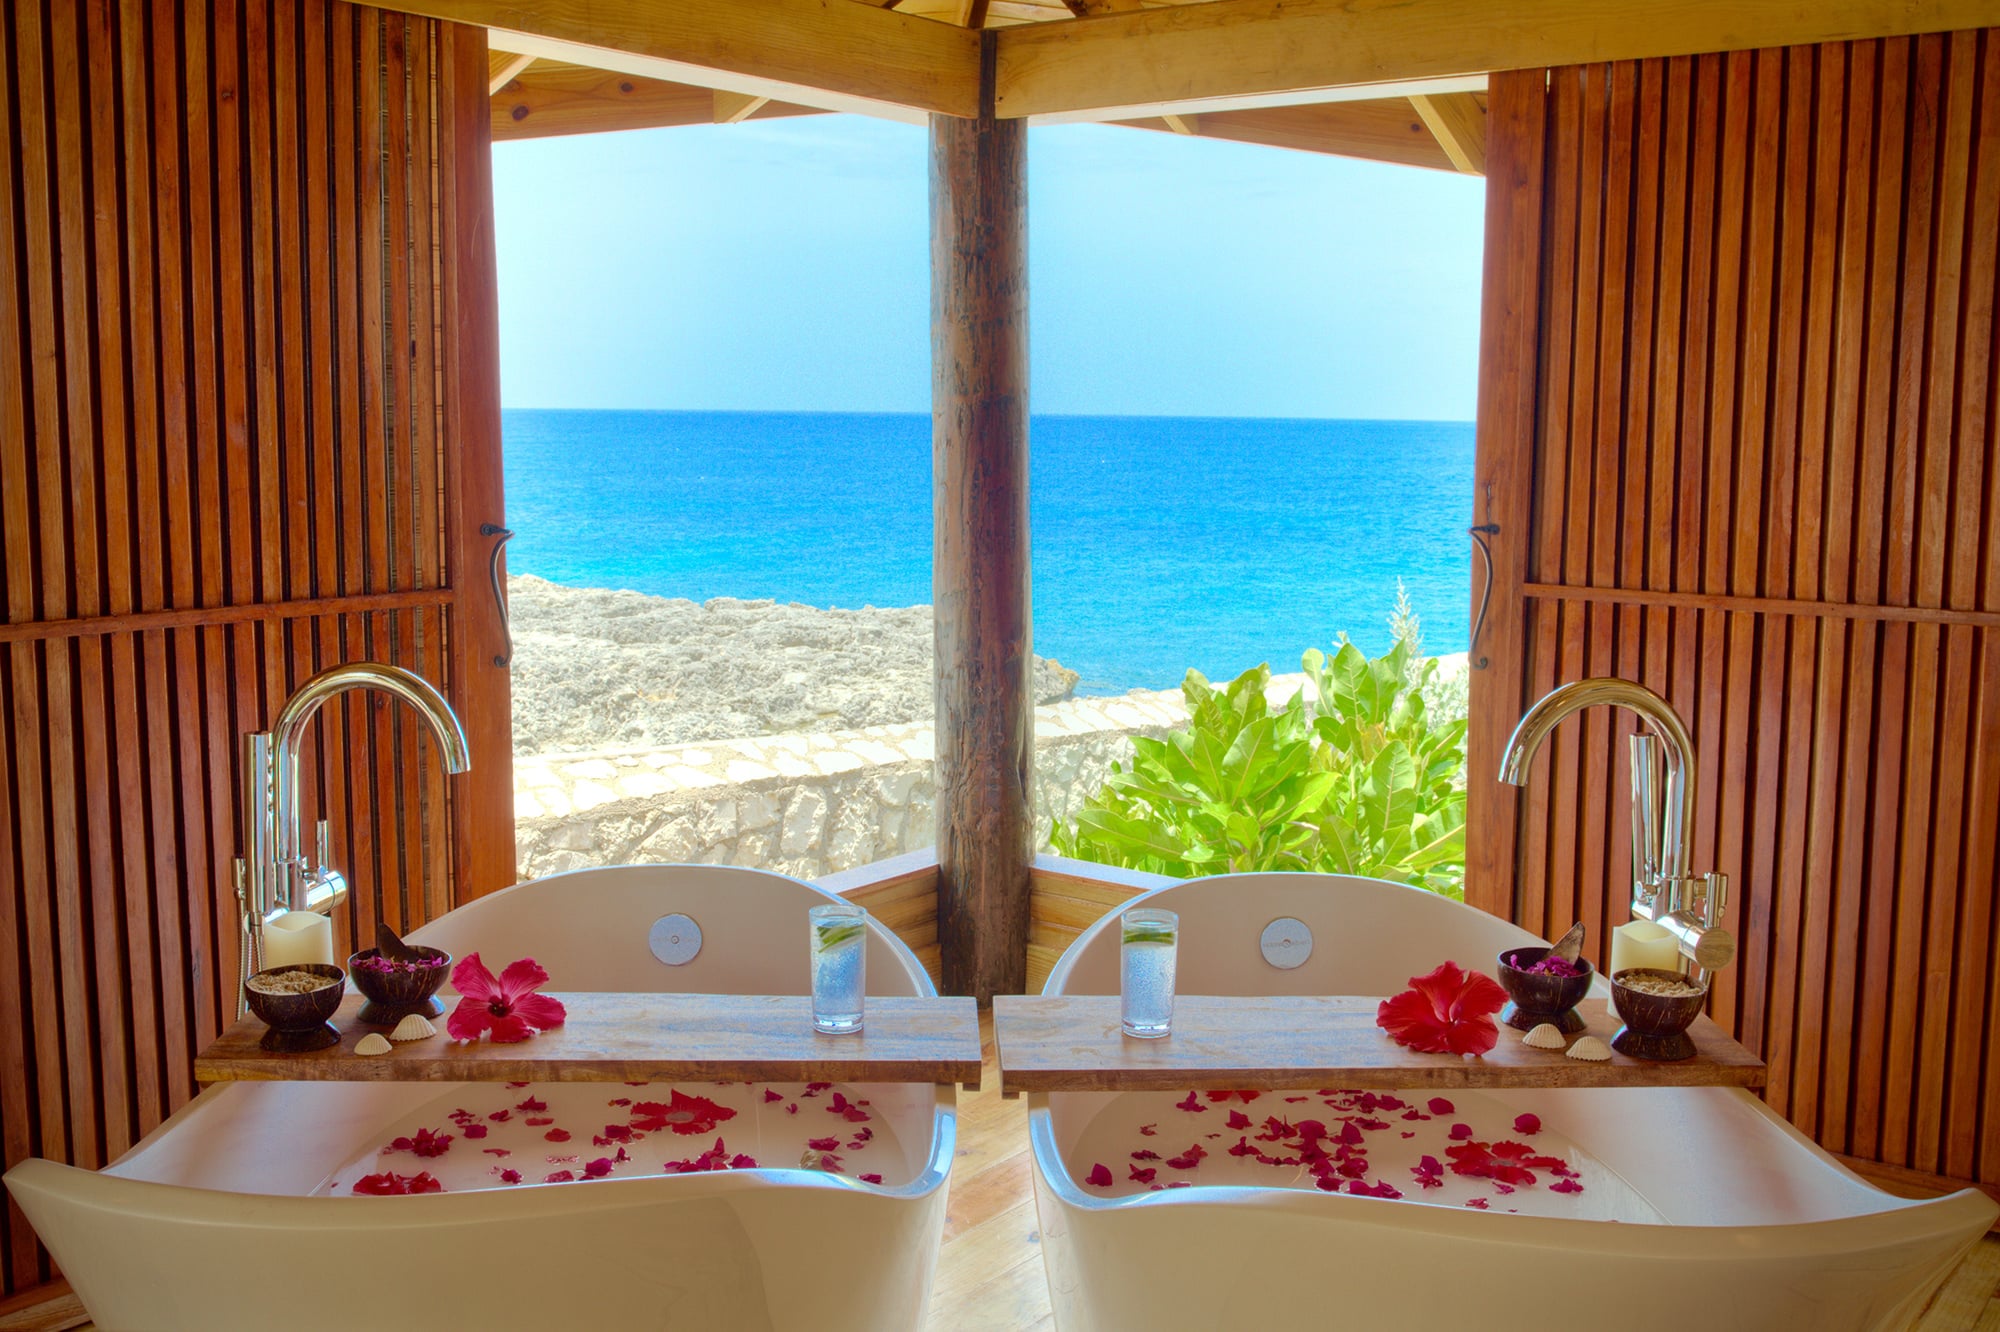 Best Hotel Spas in the Caribbean: Rockhouse Hotel